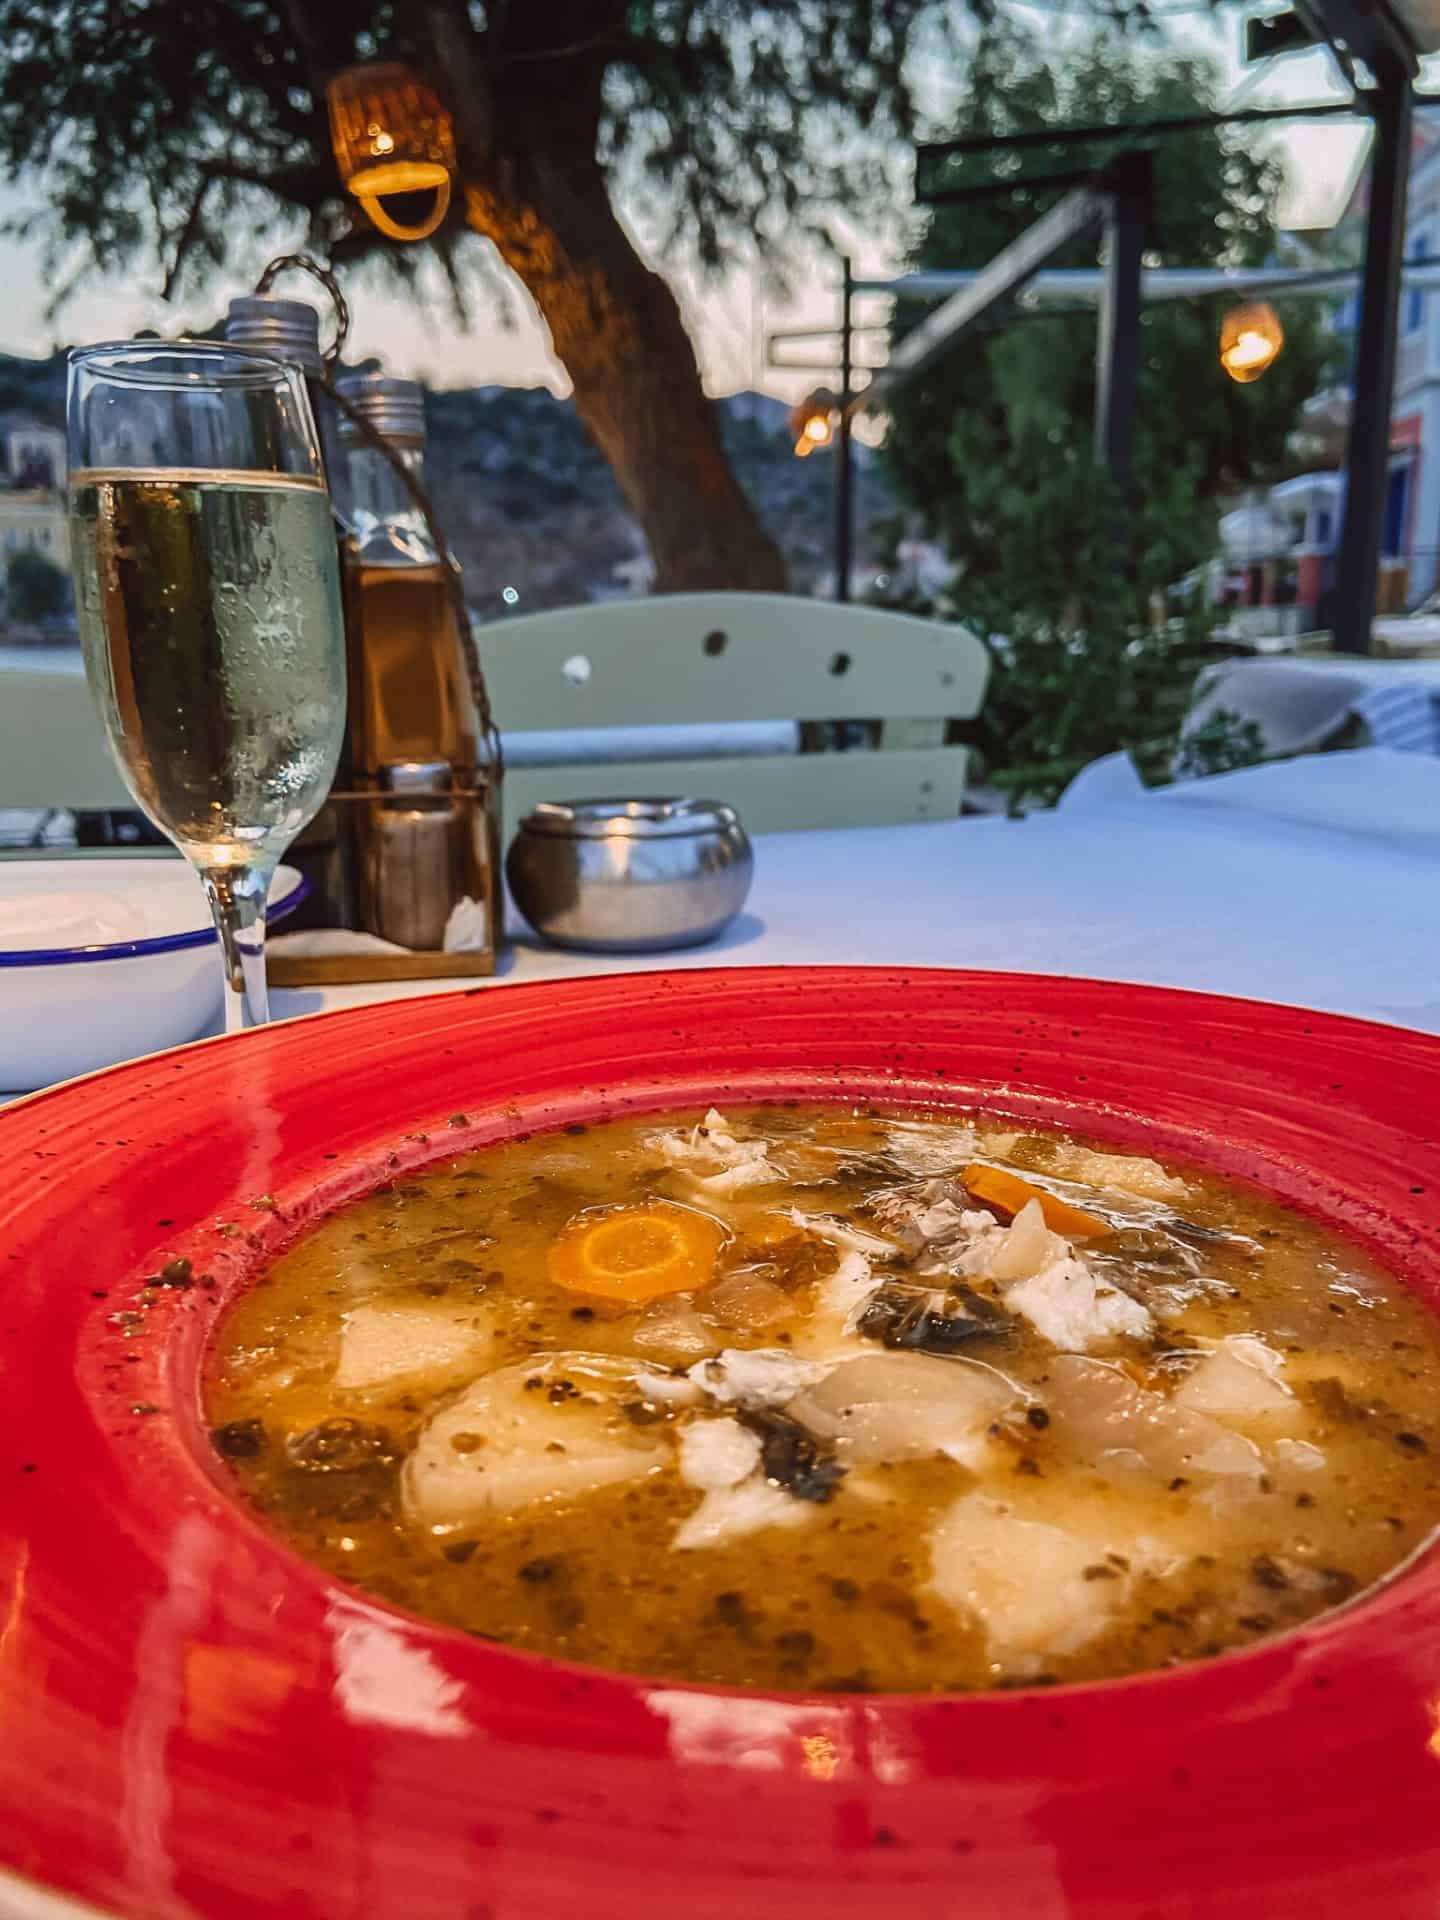 Soup and wine at a vegetarian restaurant in Greece.